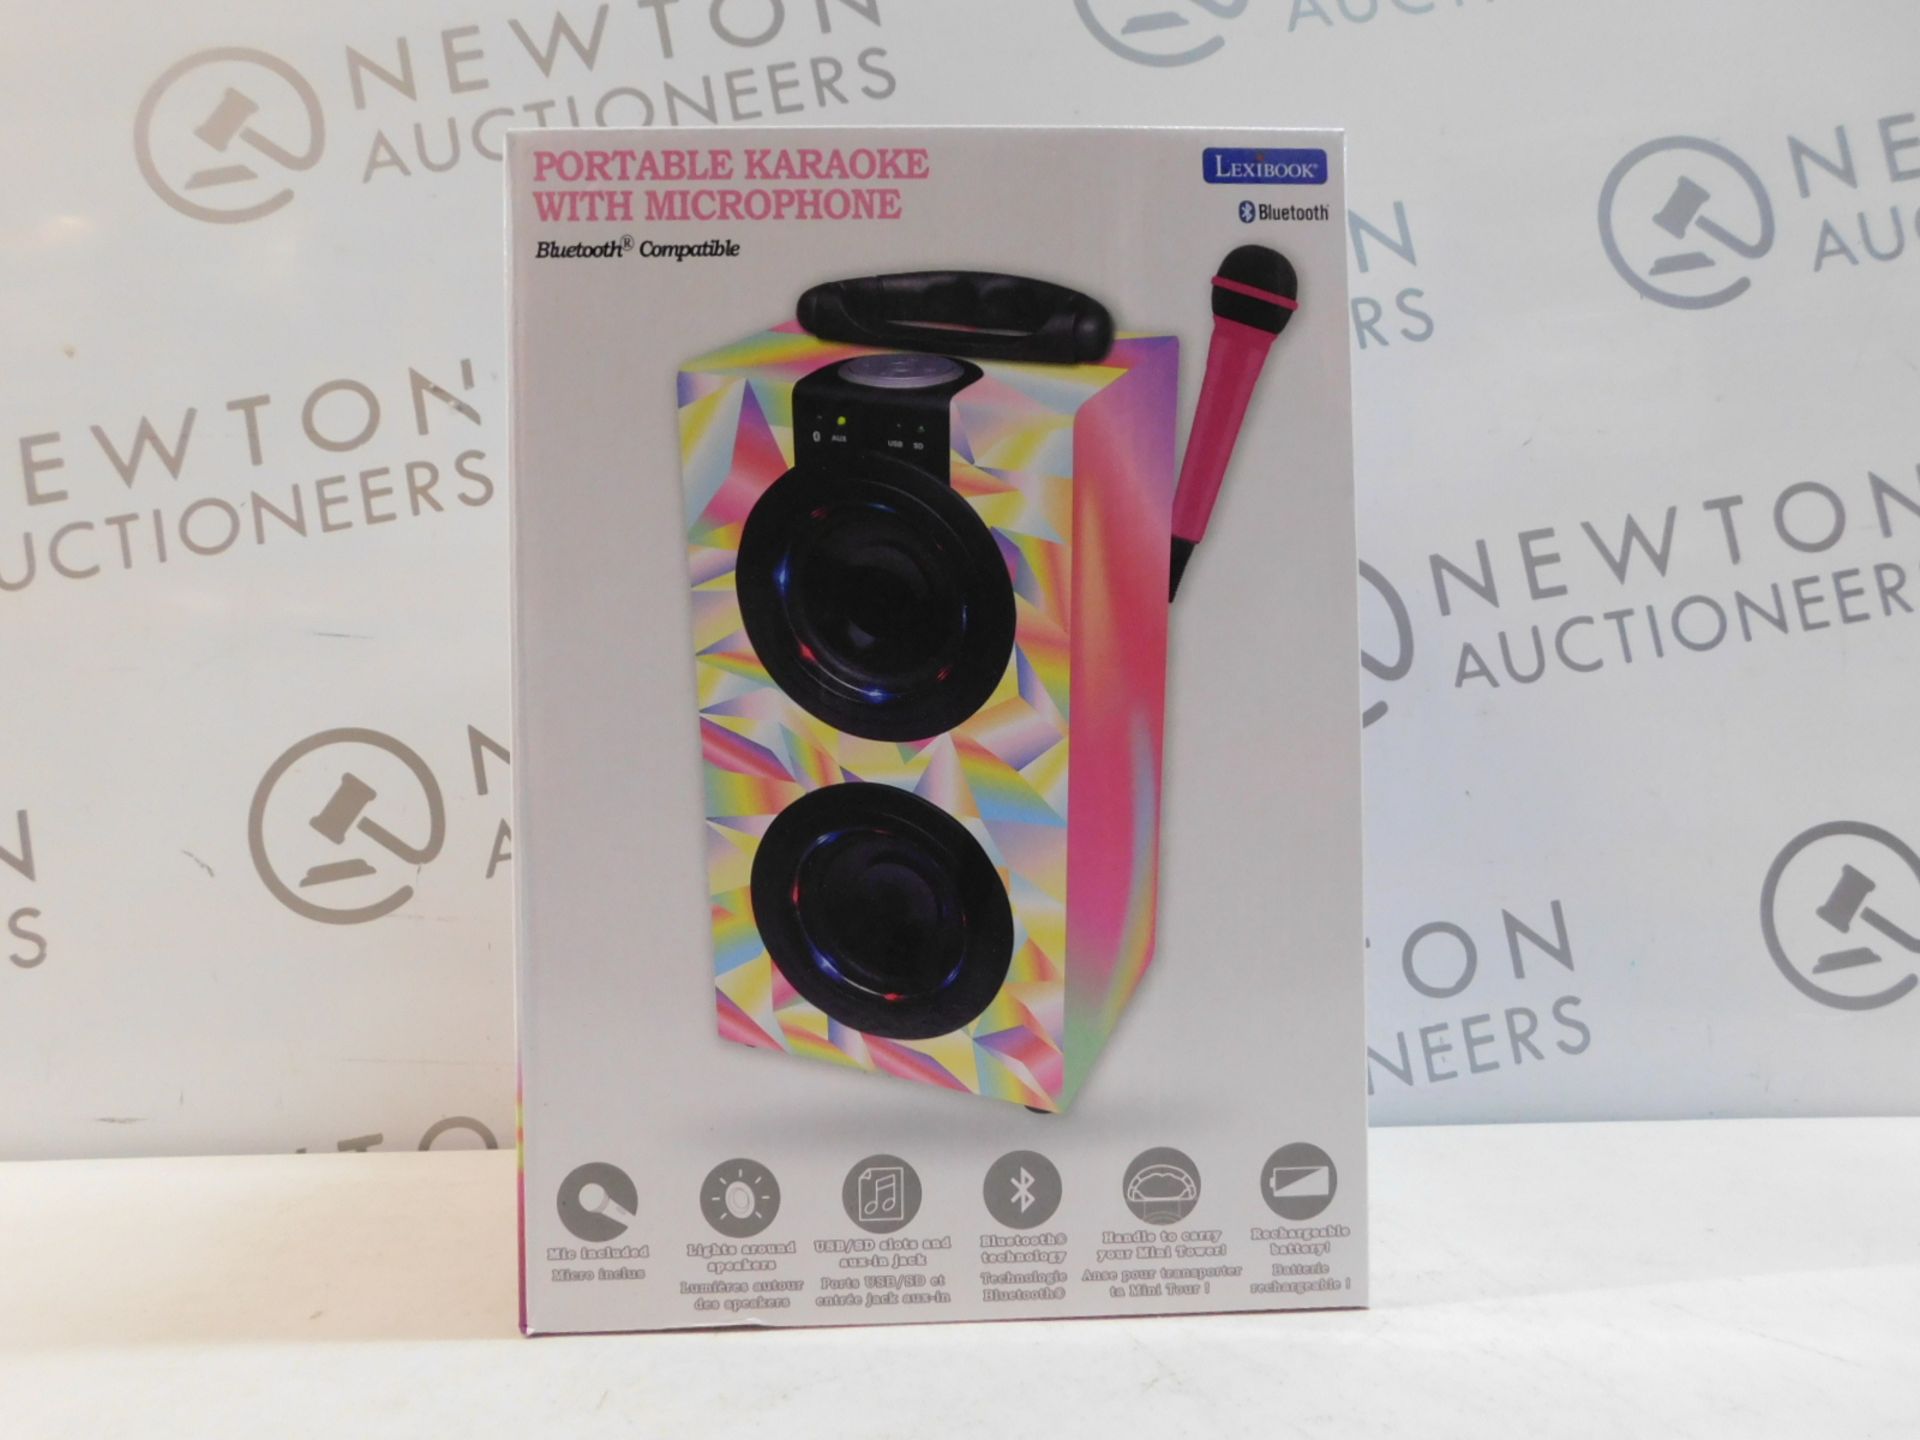 1 BOXED LEXIBOOK PORTABLE KARAOKE SPEAKER WITH MICRPHONE (BLUETOOTH COMPATIBLE) RRP £49.99